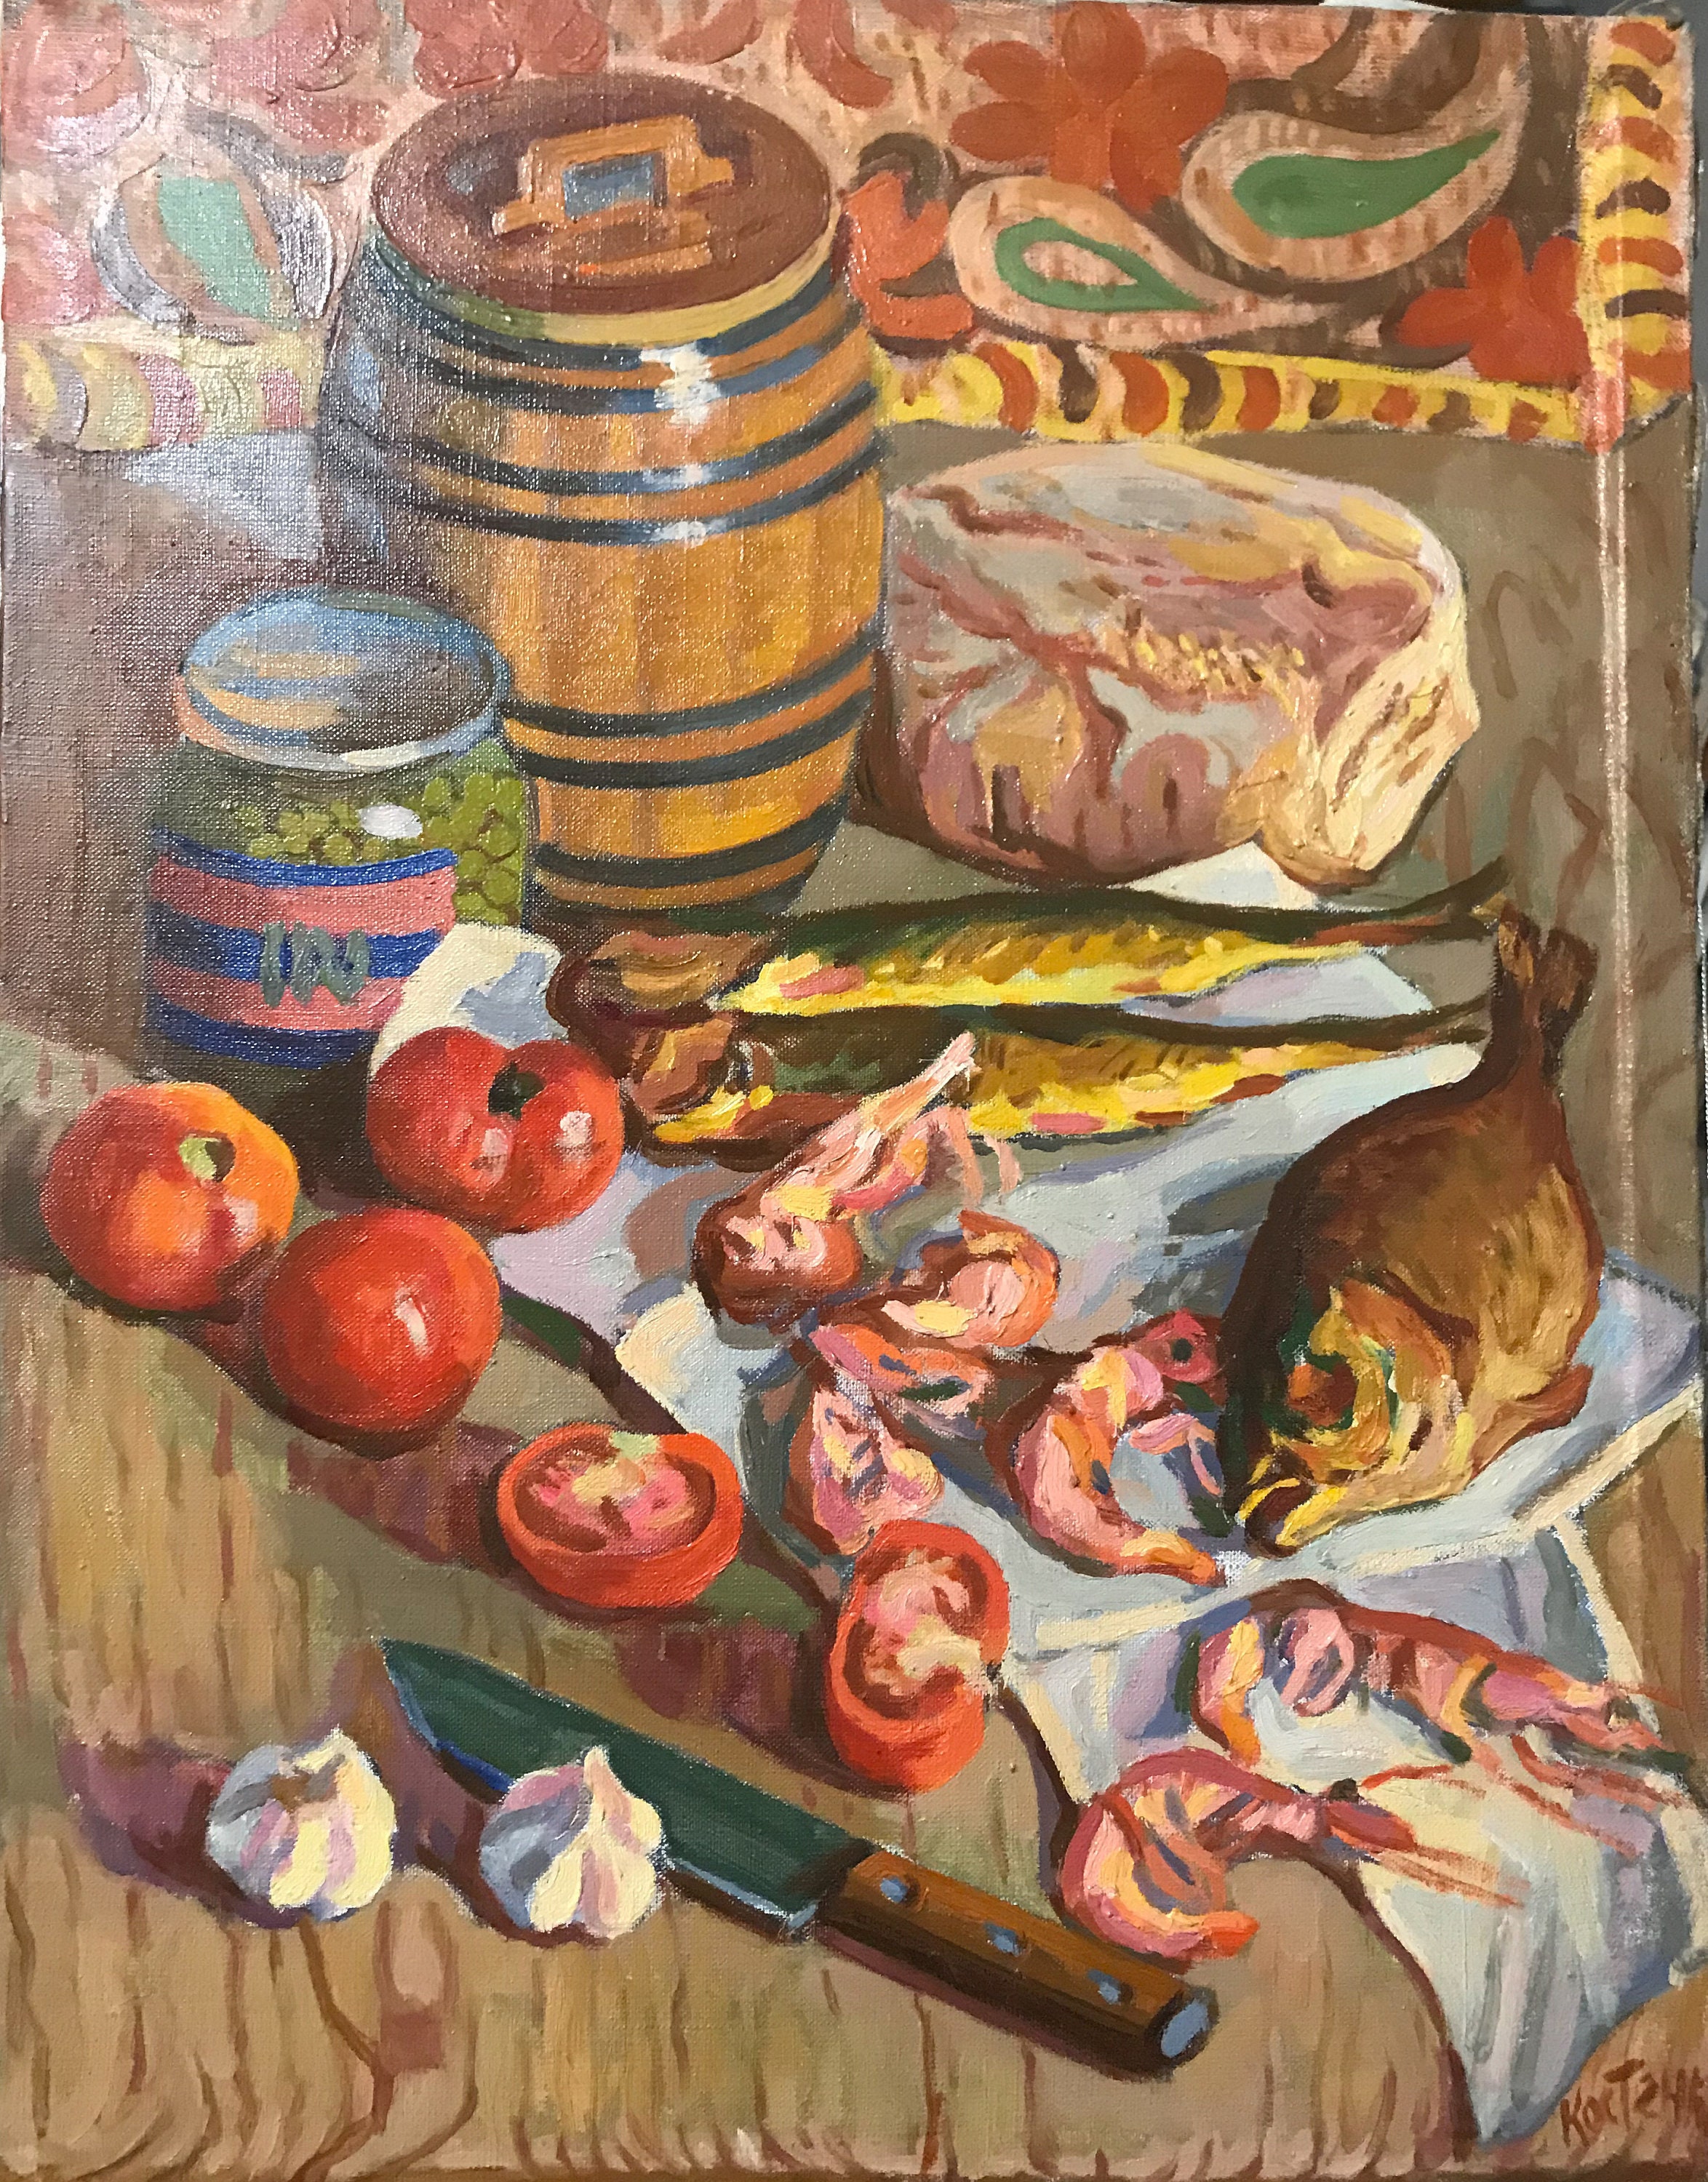 Vintage Still Life, Original Oil Painting On Canvas Signed By Soviet Artist V.kostenko, 1973, Still Life With Fish & Seafood.painting Ussr